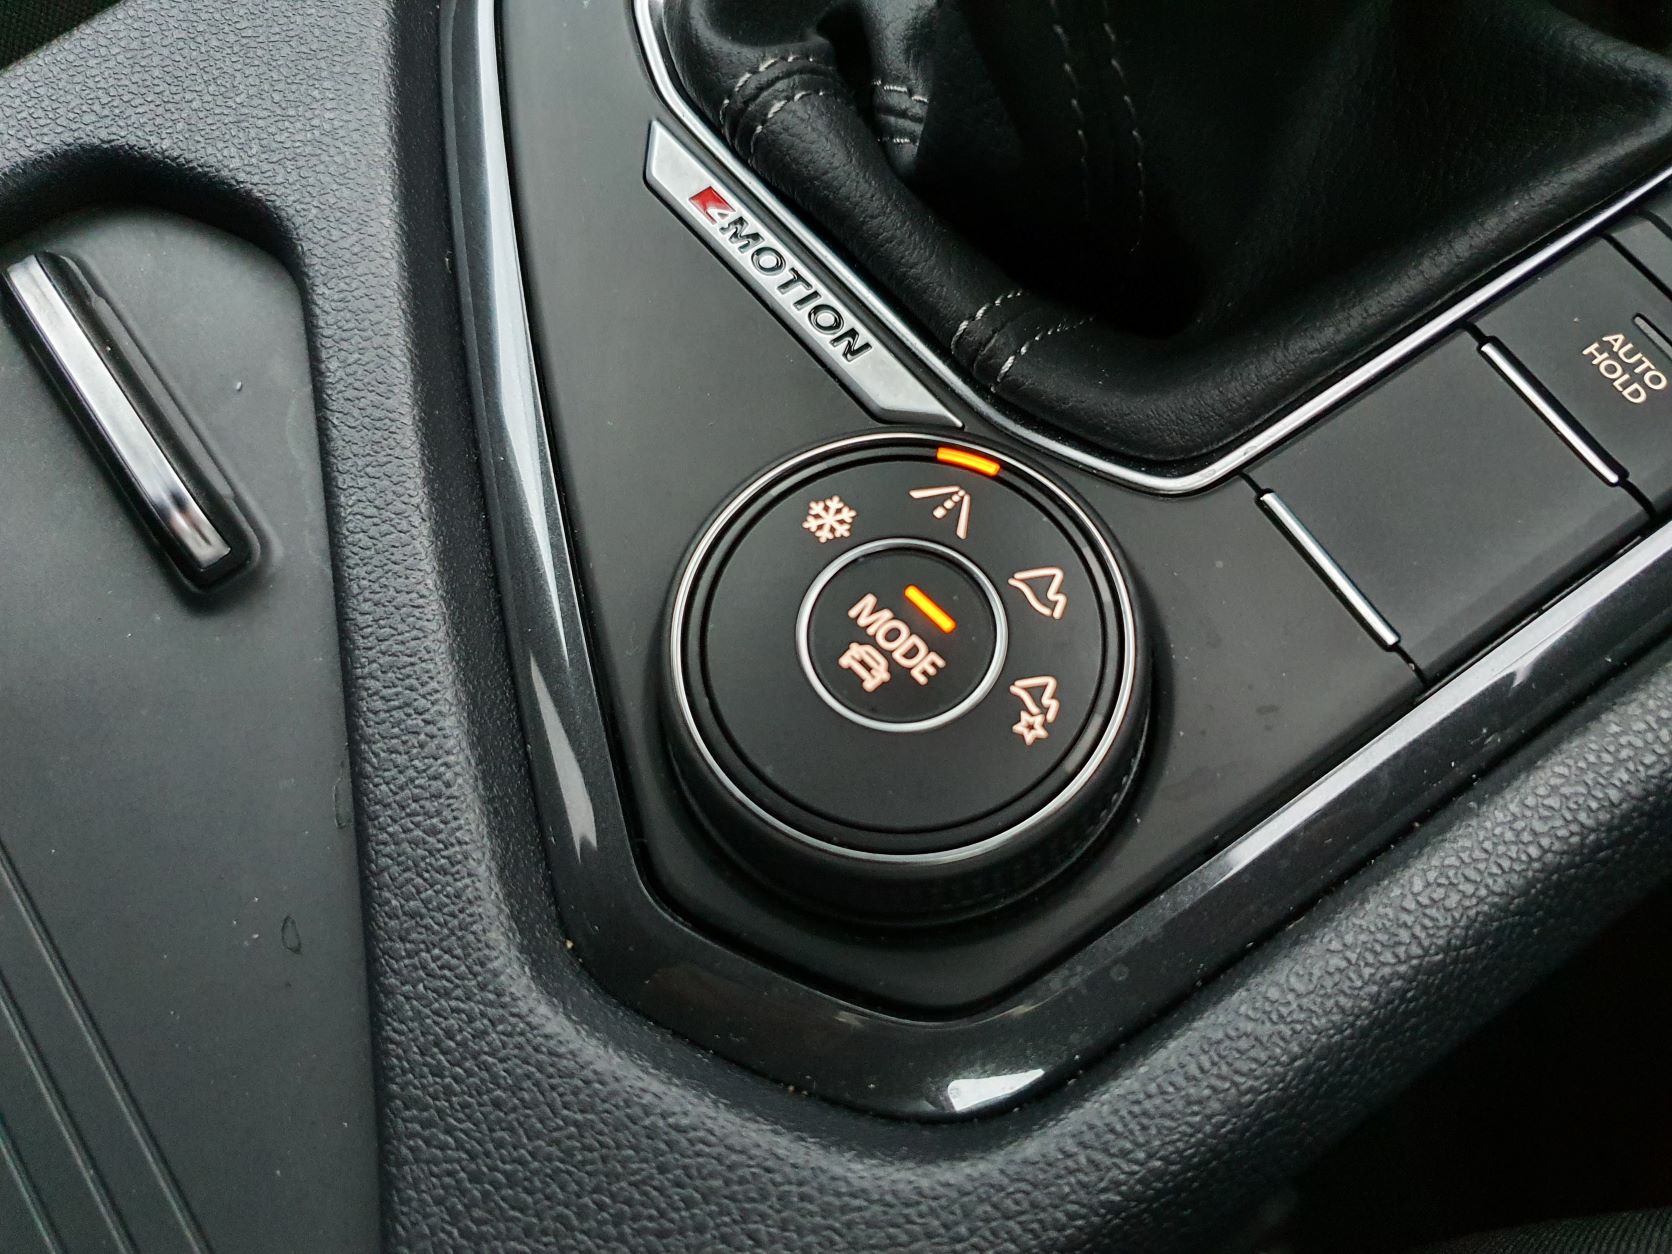 Drive mode knob and '4Motion' badging on the interior of the new Volkswagen Tiguan Allspace R-Line